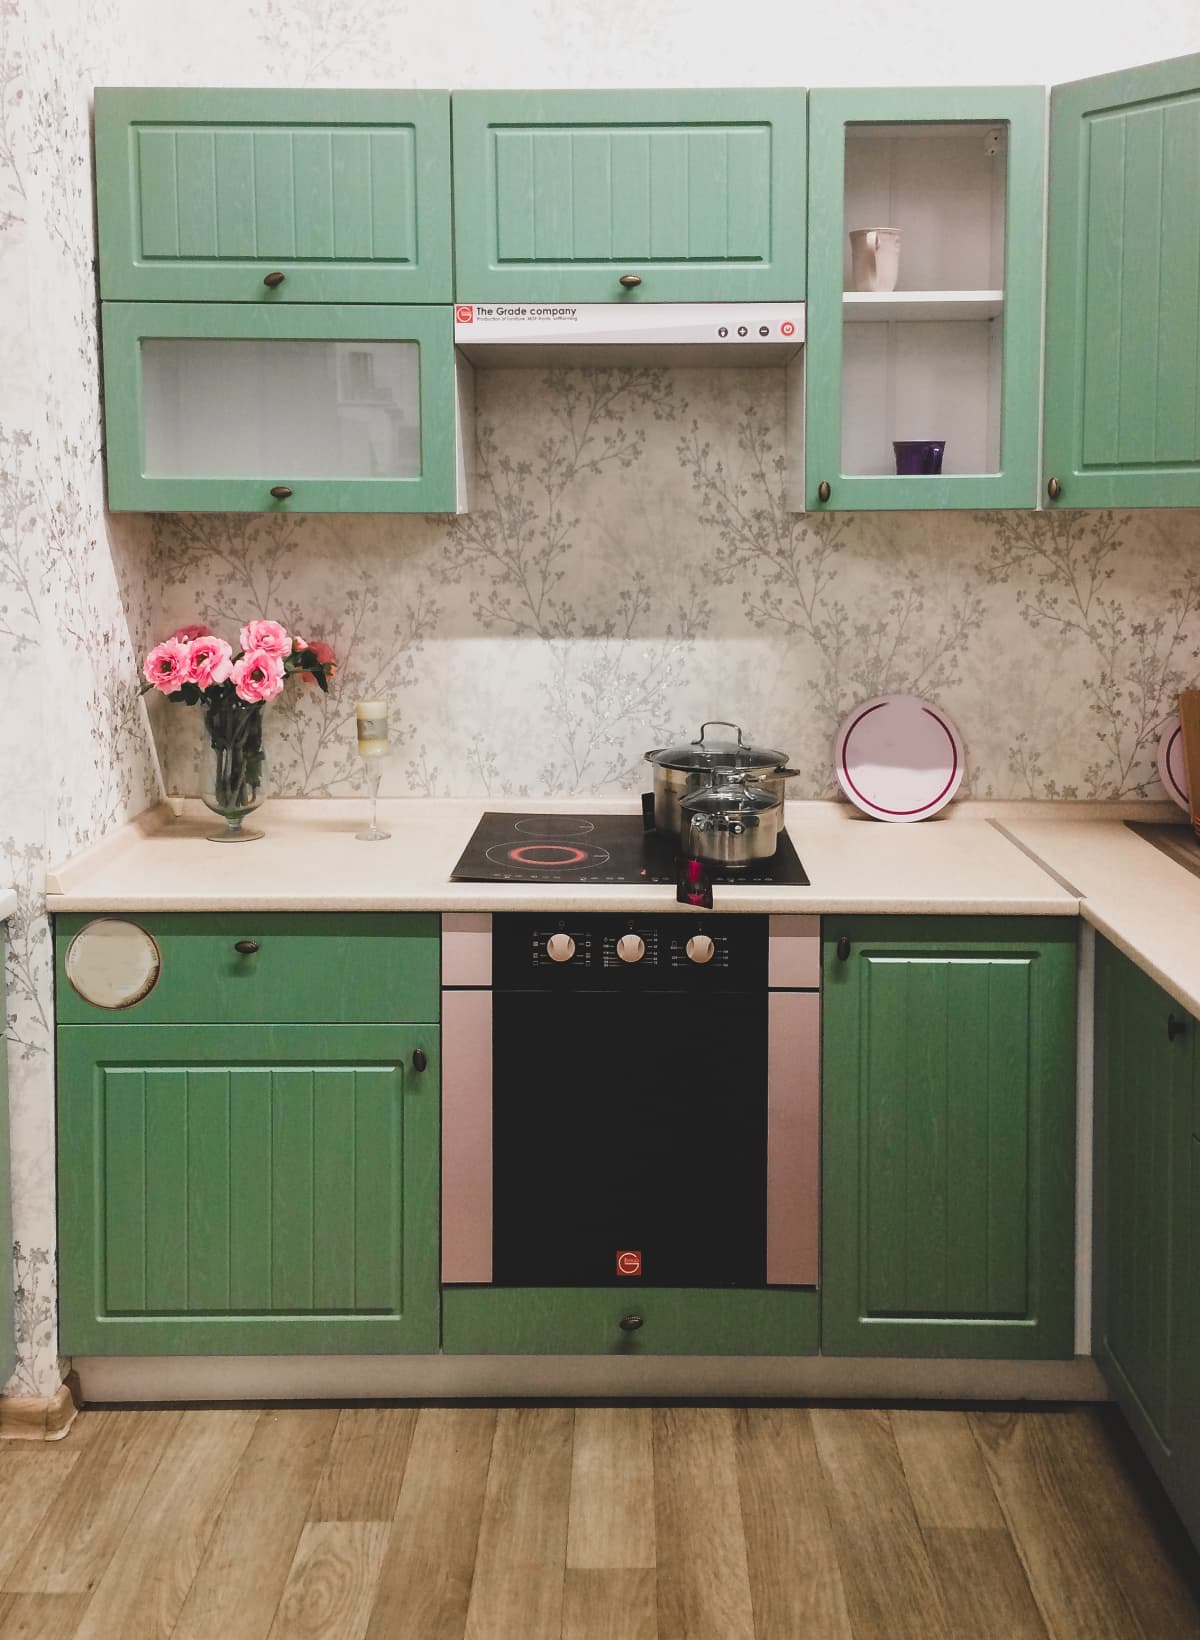 Cozy kitchen. Kitchen furniture in a pleasant green color.